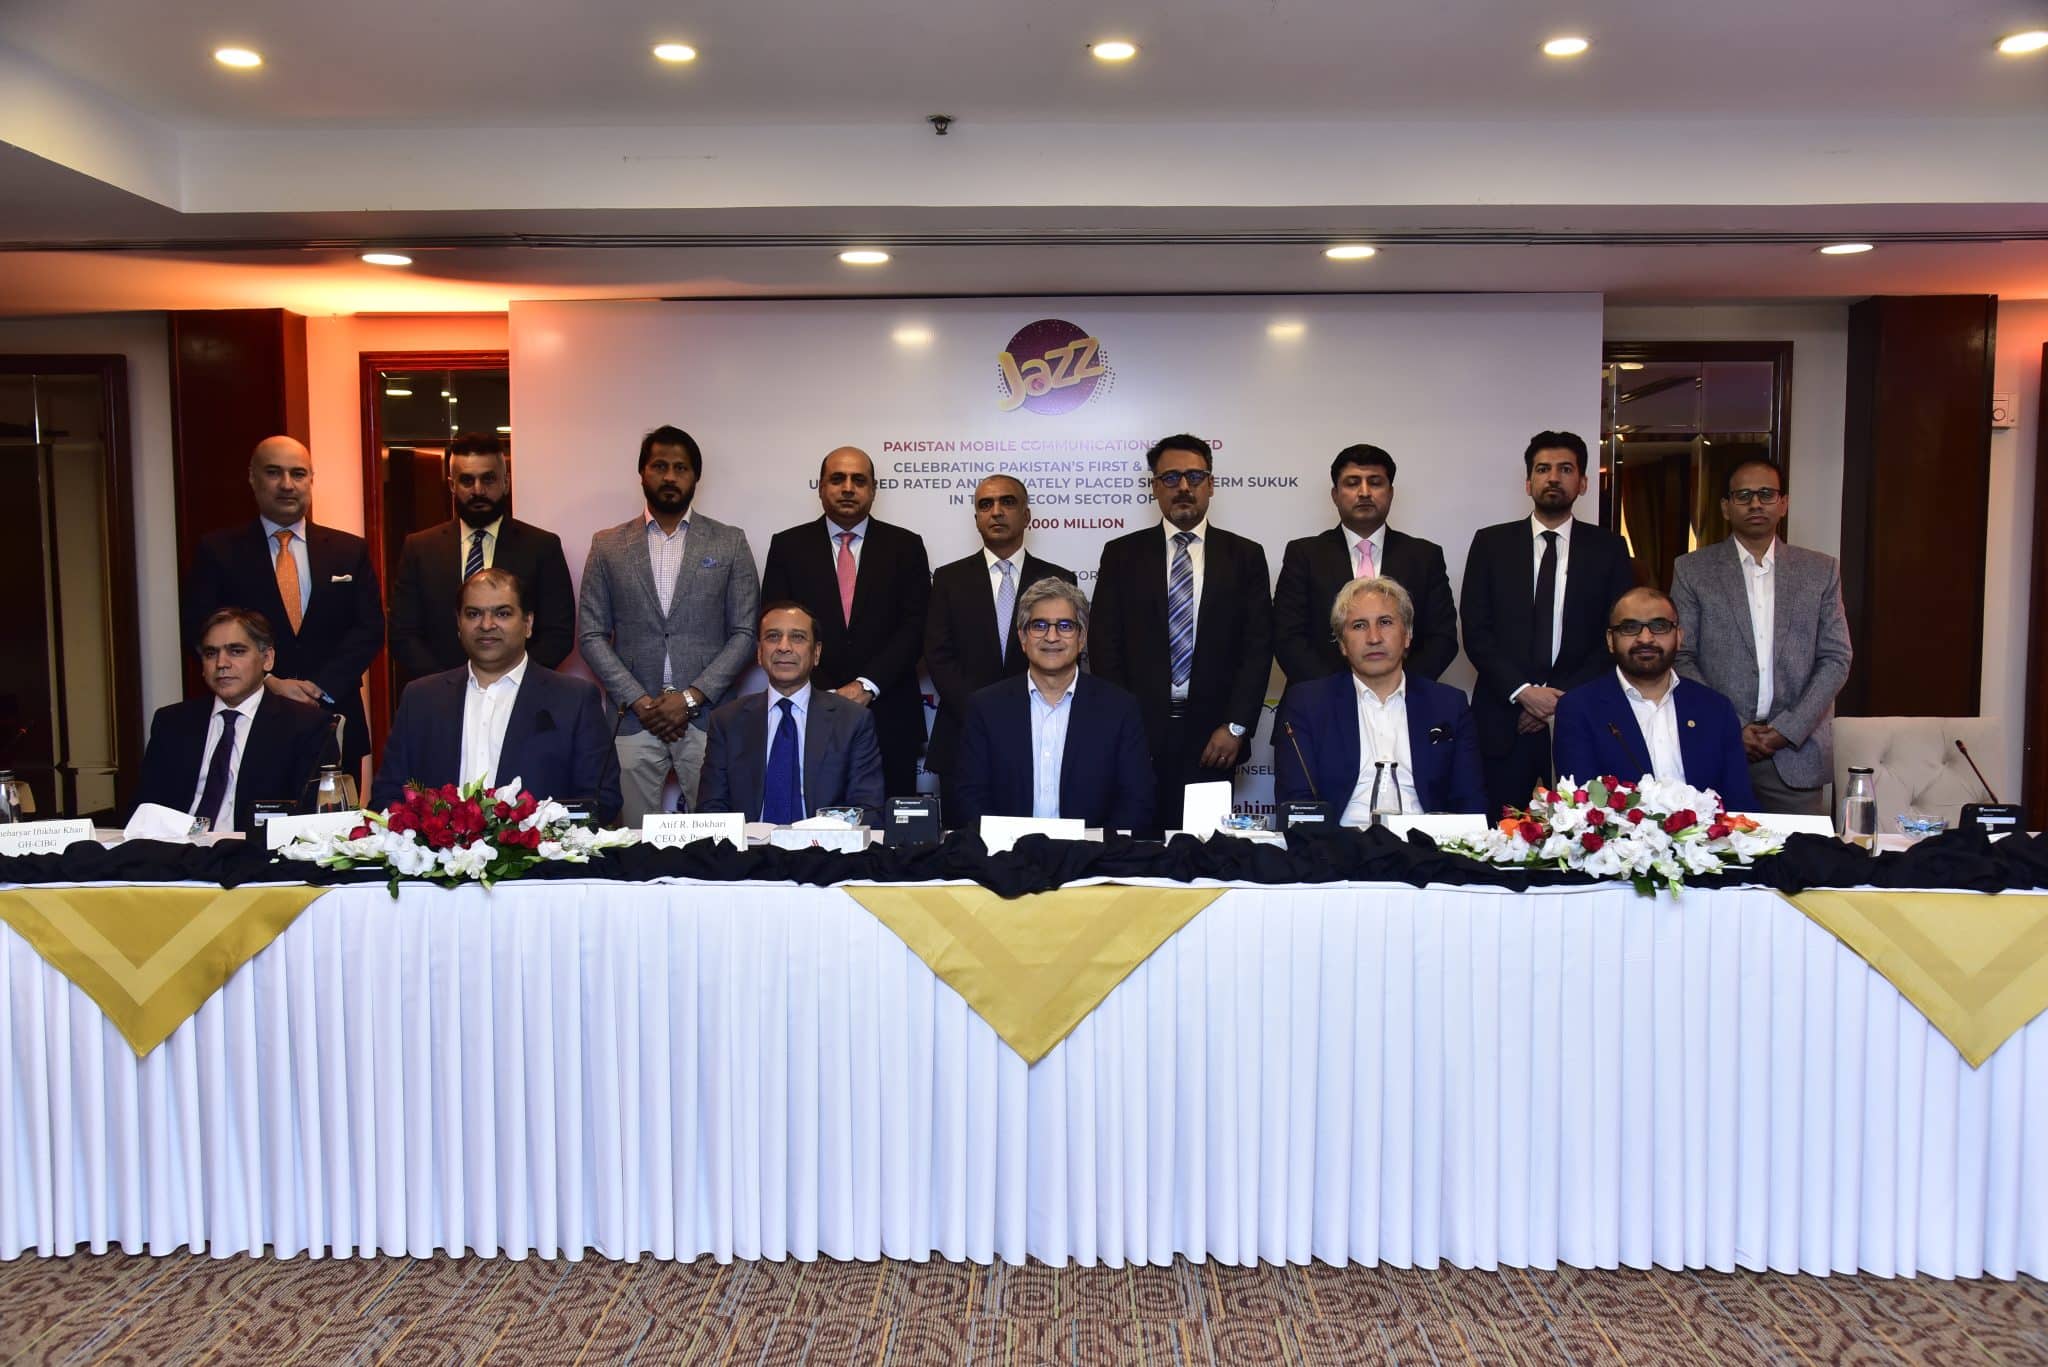 Jazz Closes First-Ever Telecom Sukuk at Rs. 15 Billion to Advance its 4G For All Digital Agenda